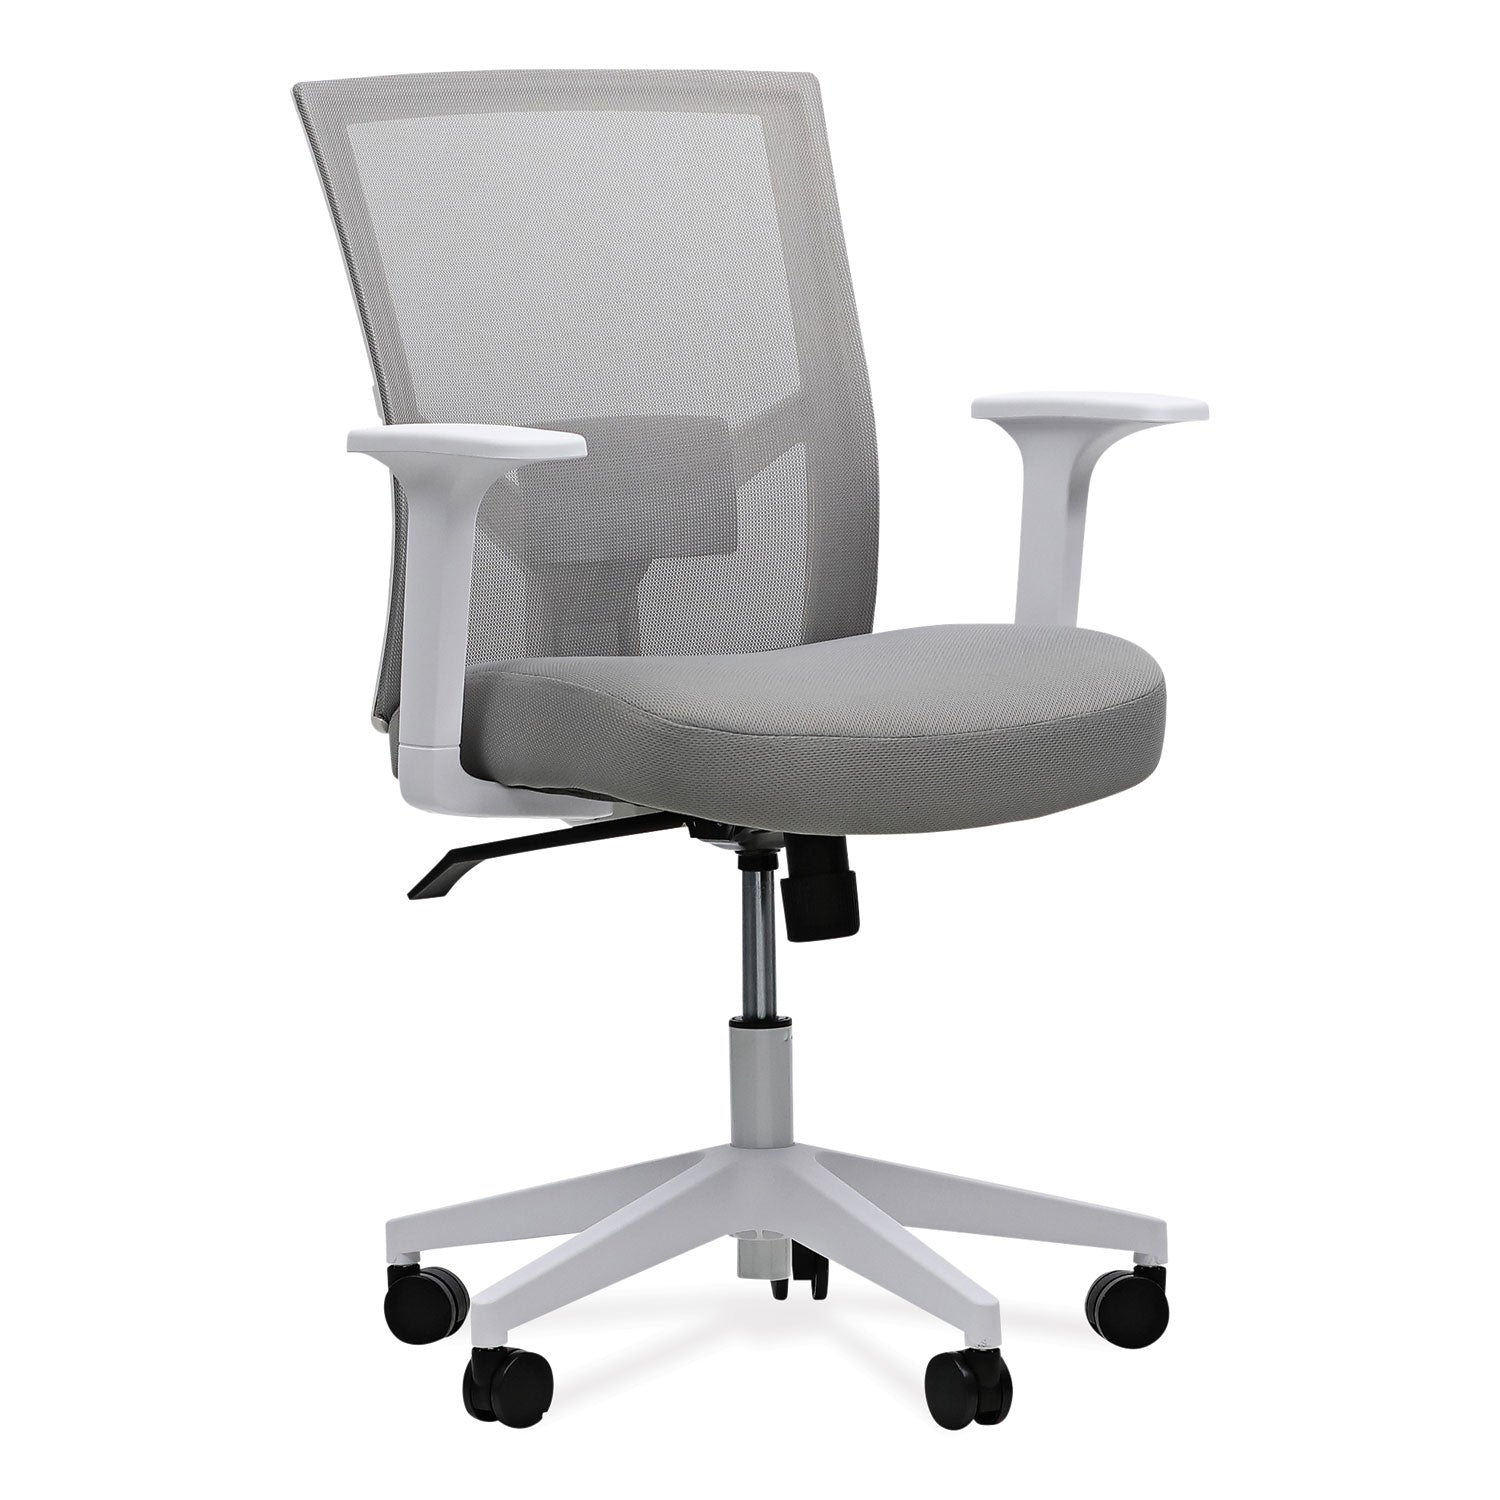 mesh-back-fabric-task-chair-supports-up-to-275-lb-1732-to-211-seat-height-gray-seat-gray-back_alews42b47 - 1